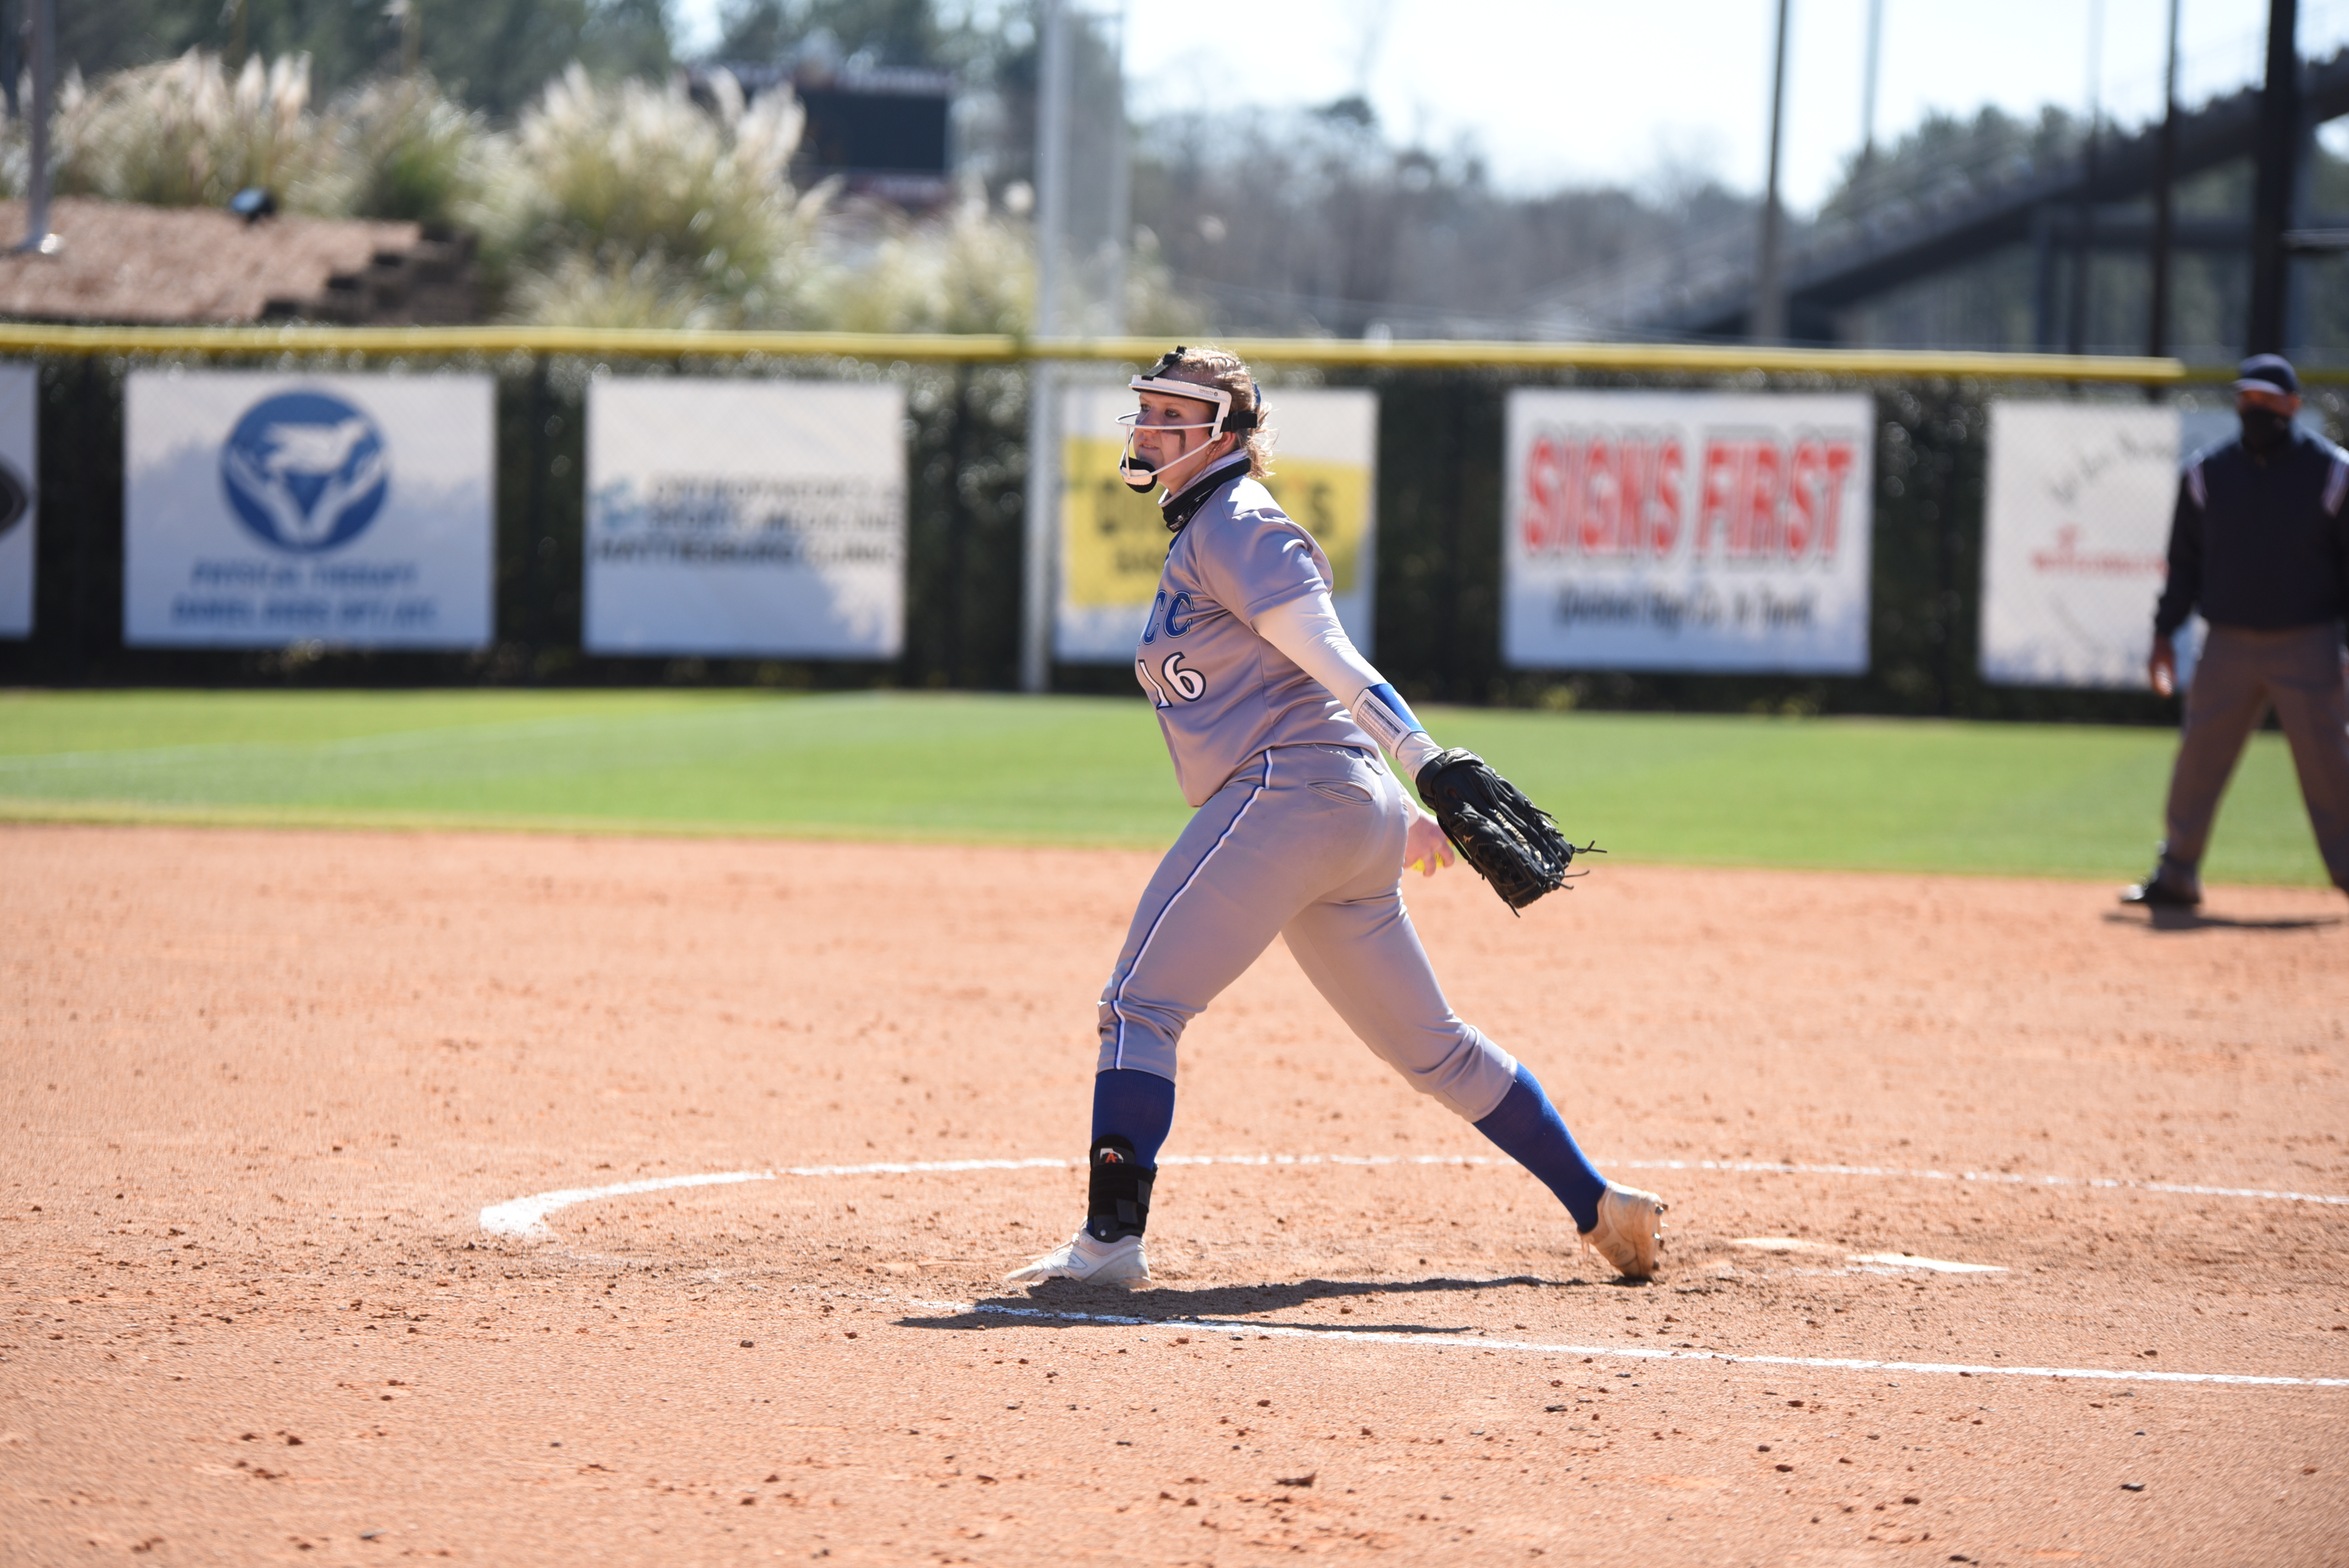 DMACC softball team wraps up six-game road trip with two wins